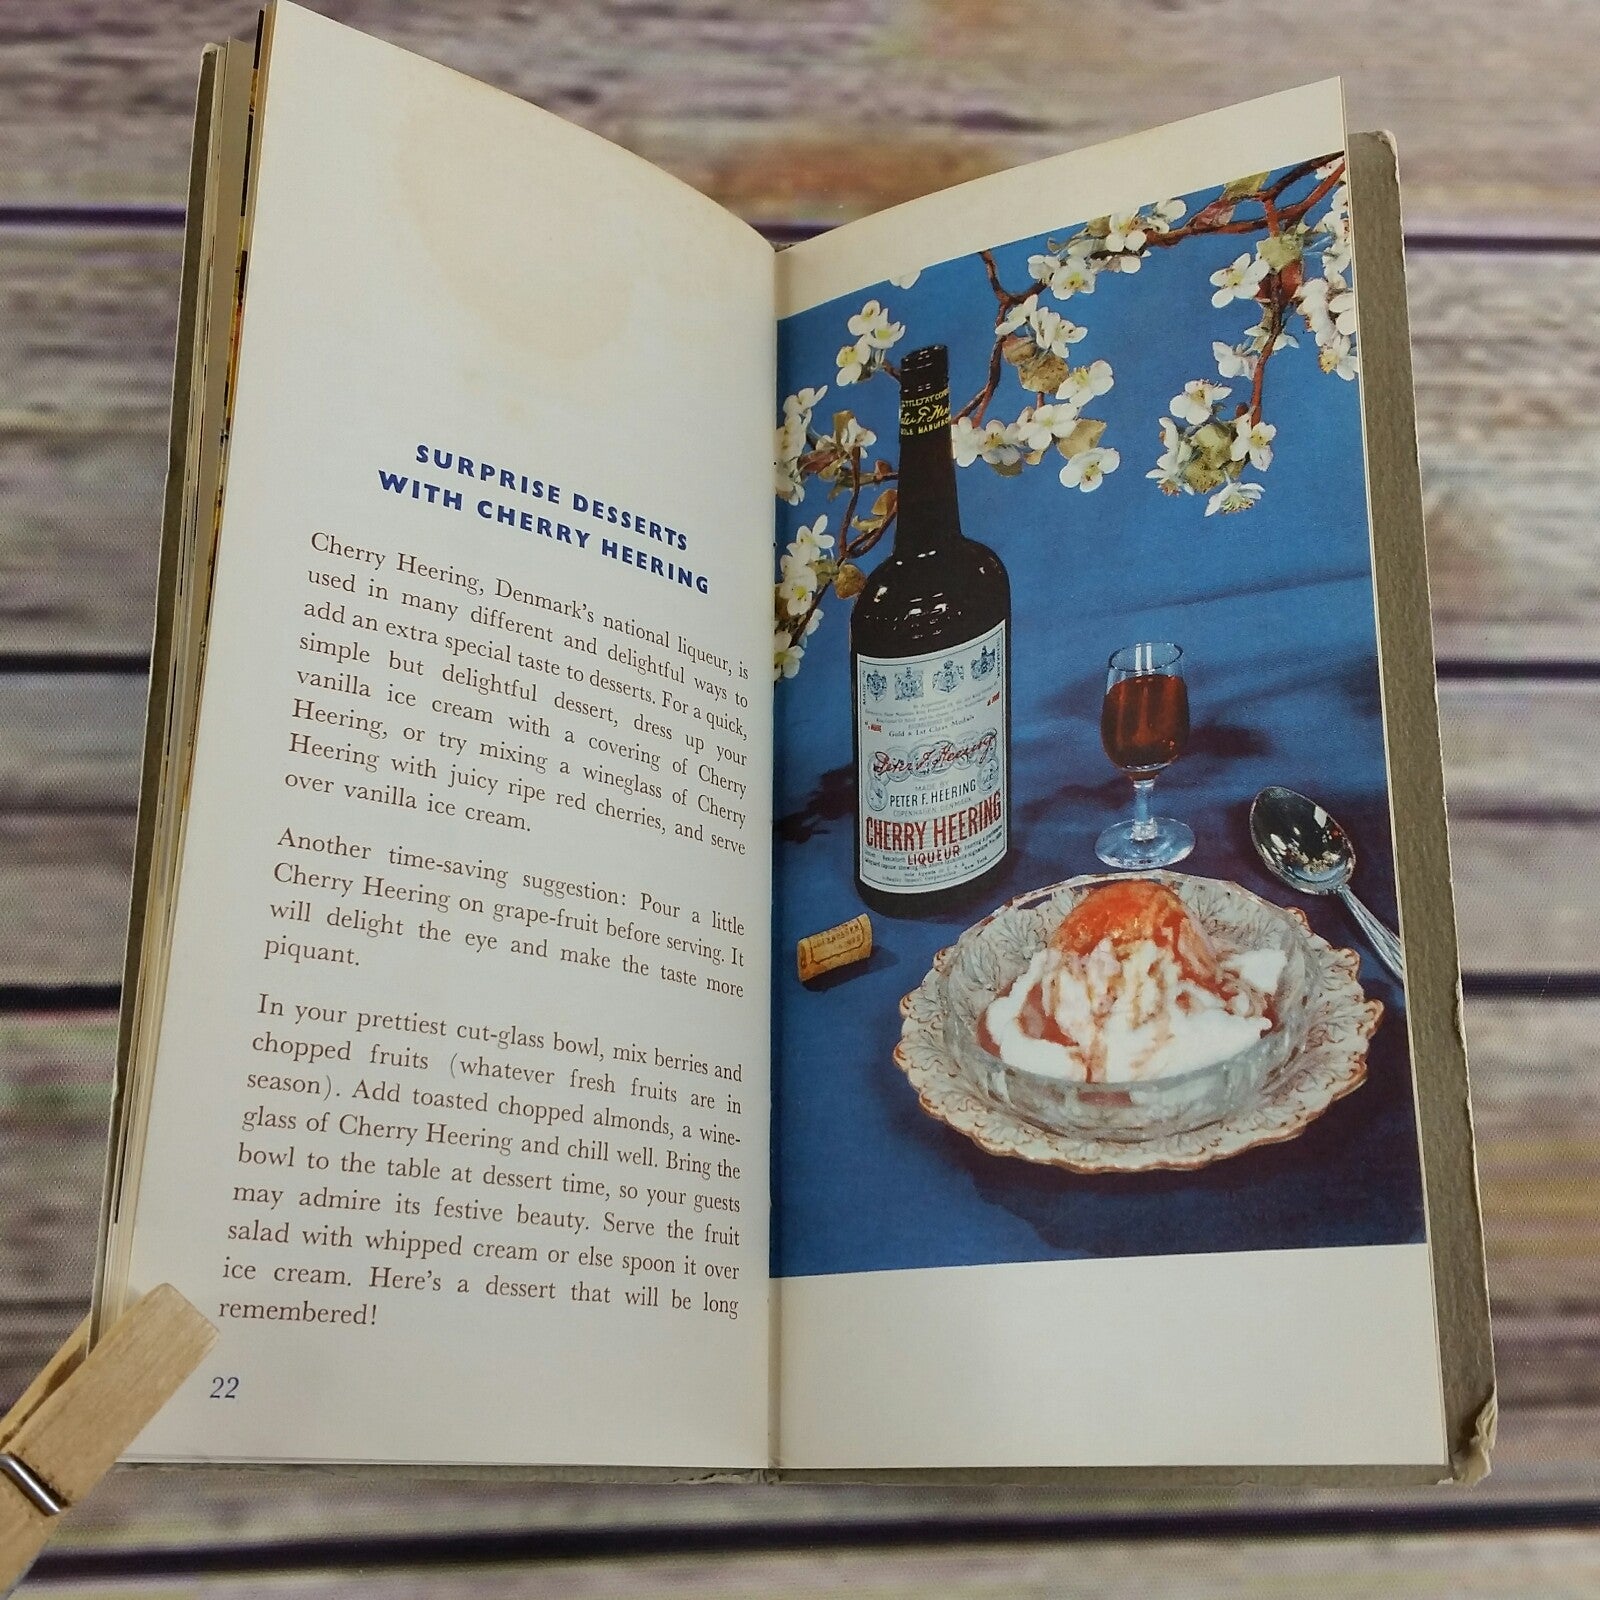 Vintage Cookbook Entertain Differently in the Danish Manner 1956 Cherry Heering Liqueur Alcohol Promo Booklet Denmark - At Grandma's Table